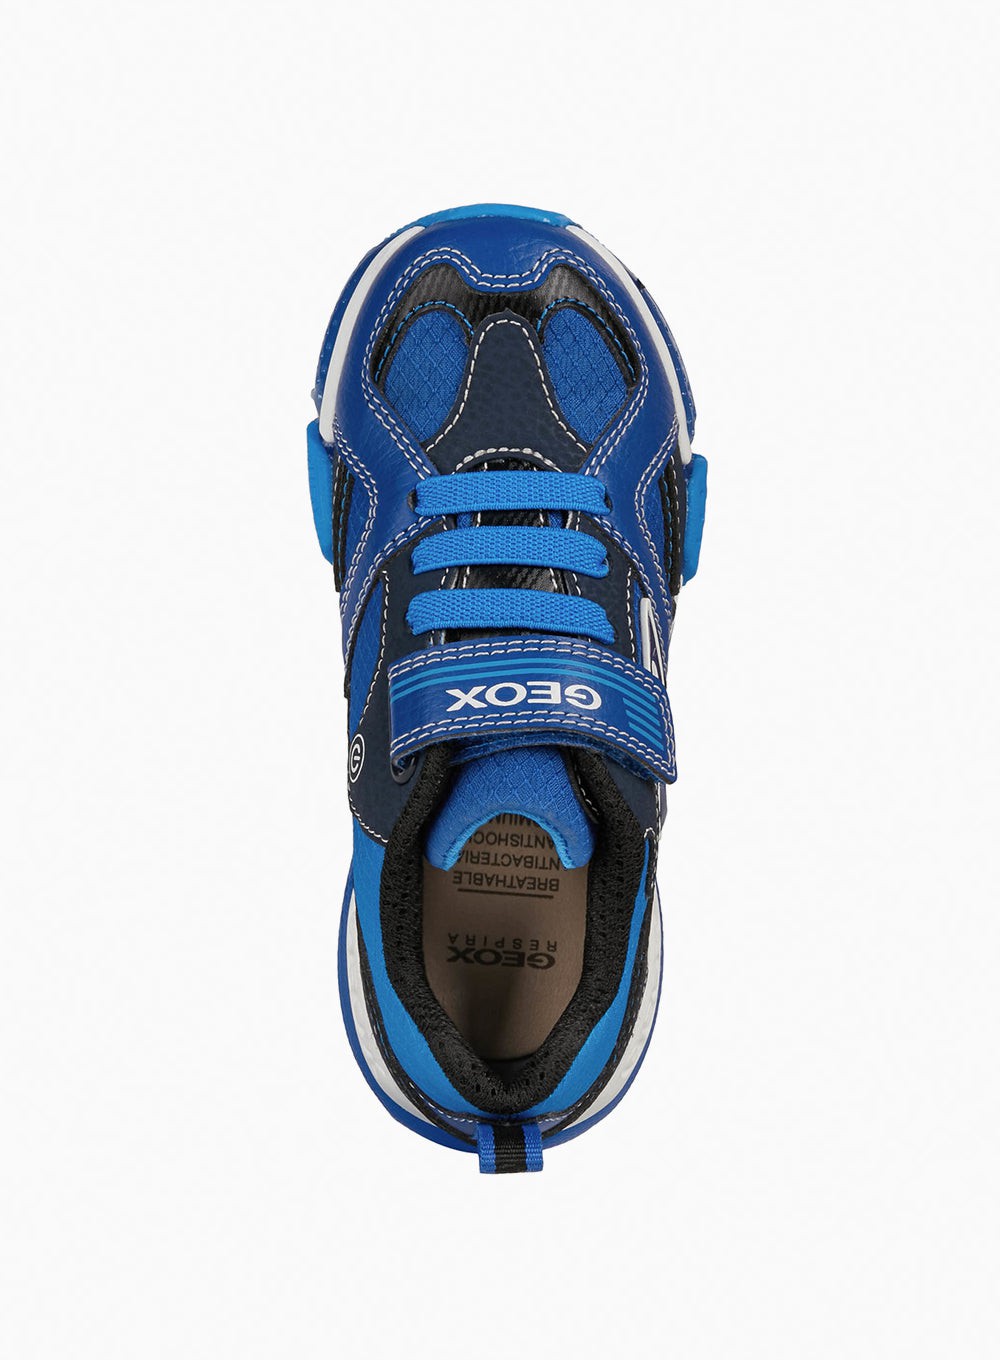 Geox Bayonyc Light-Up Trainers Royal Blue | Trotters Childrenswear